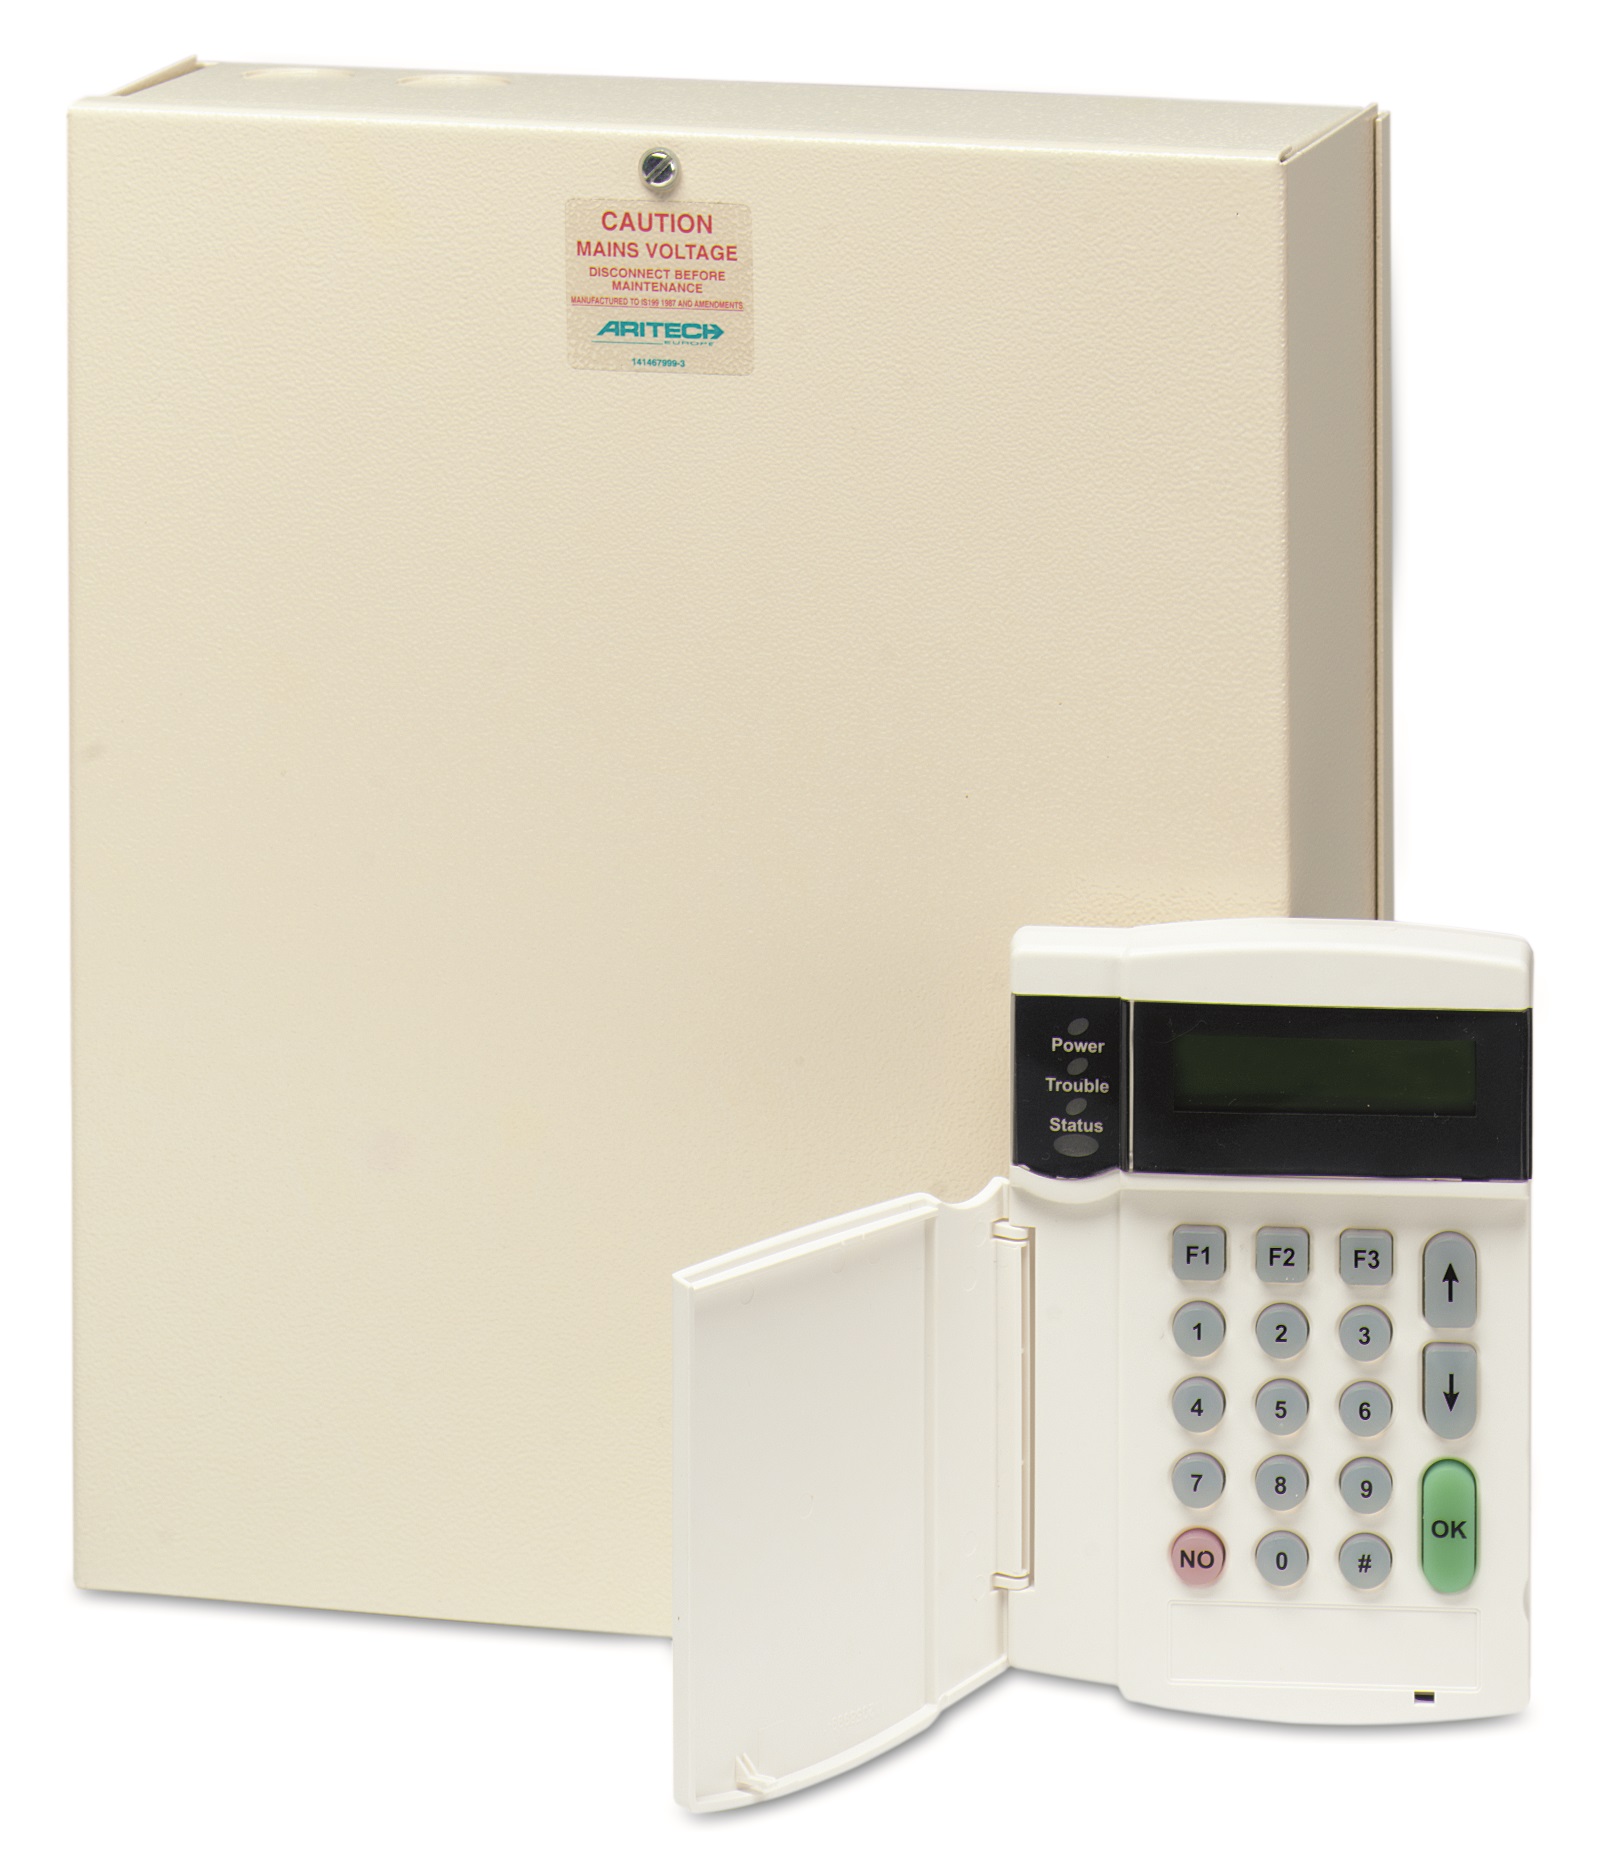 Your old cs250 alarm panel can be upgraded with the Zero Wire System from Alarms4u Dublin